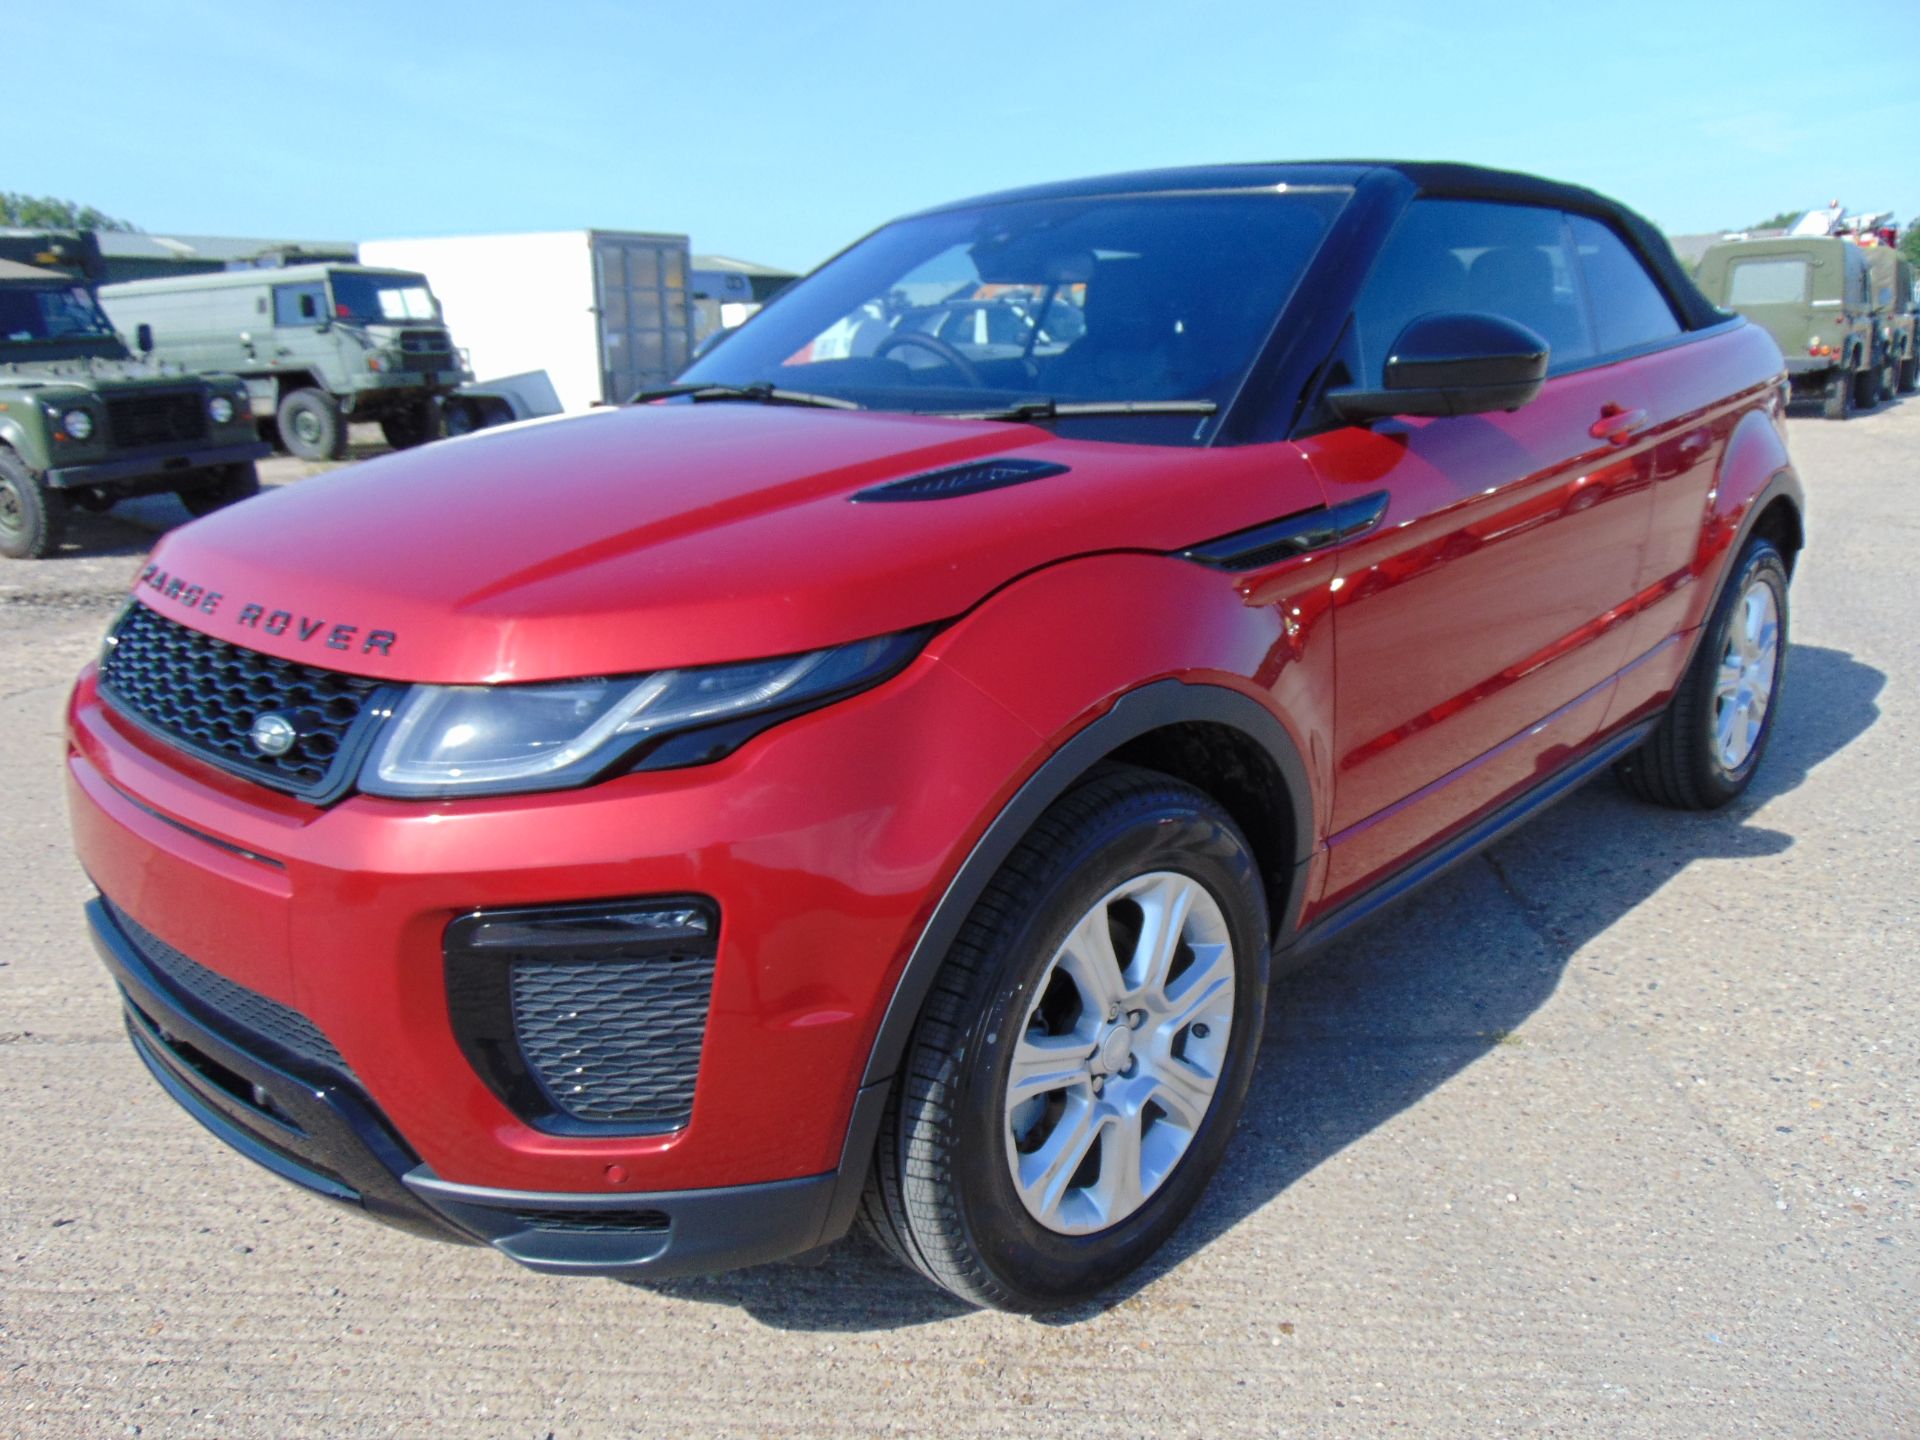 NEW UNUSED Range Rover Evoque 2.0 i4 HSE Dynamic Convertible - Image 10 of 39